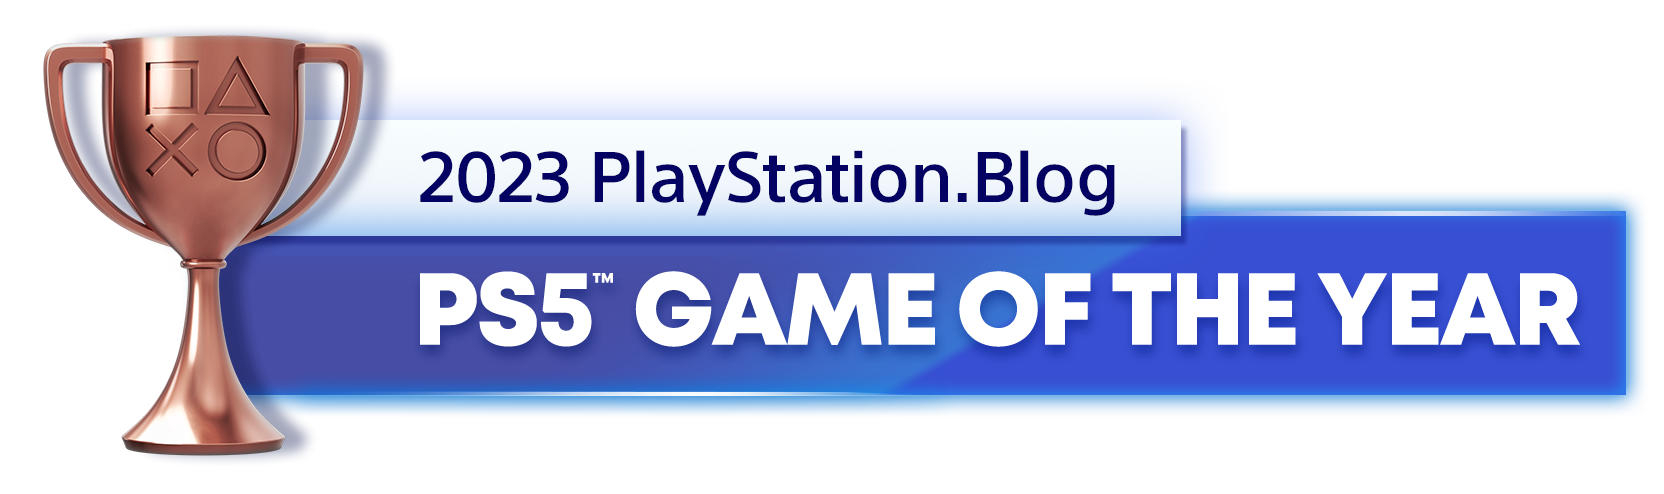  "Bronze Trophy for the 2023 PlayStation Blog PS5 Game of the Year Winner"